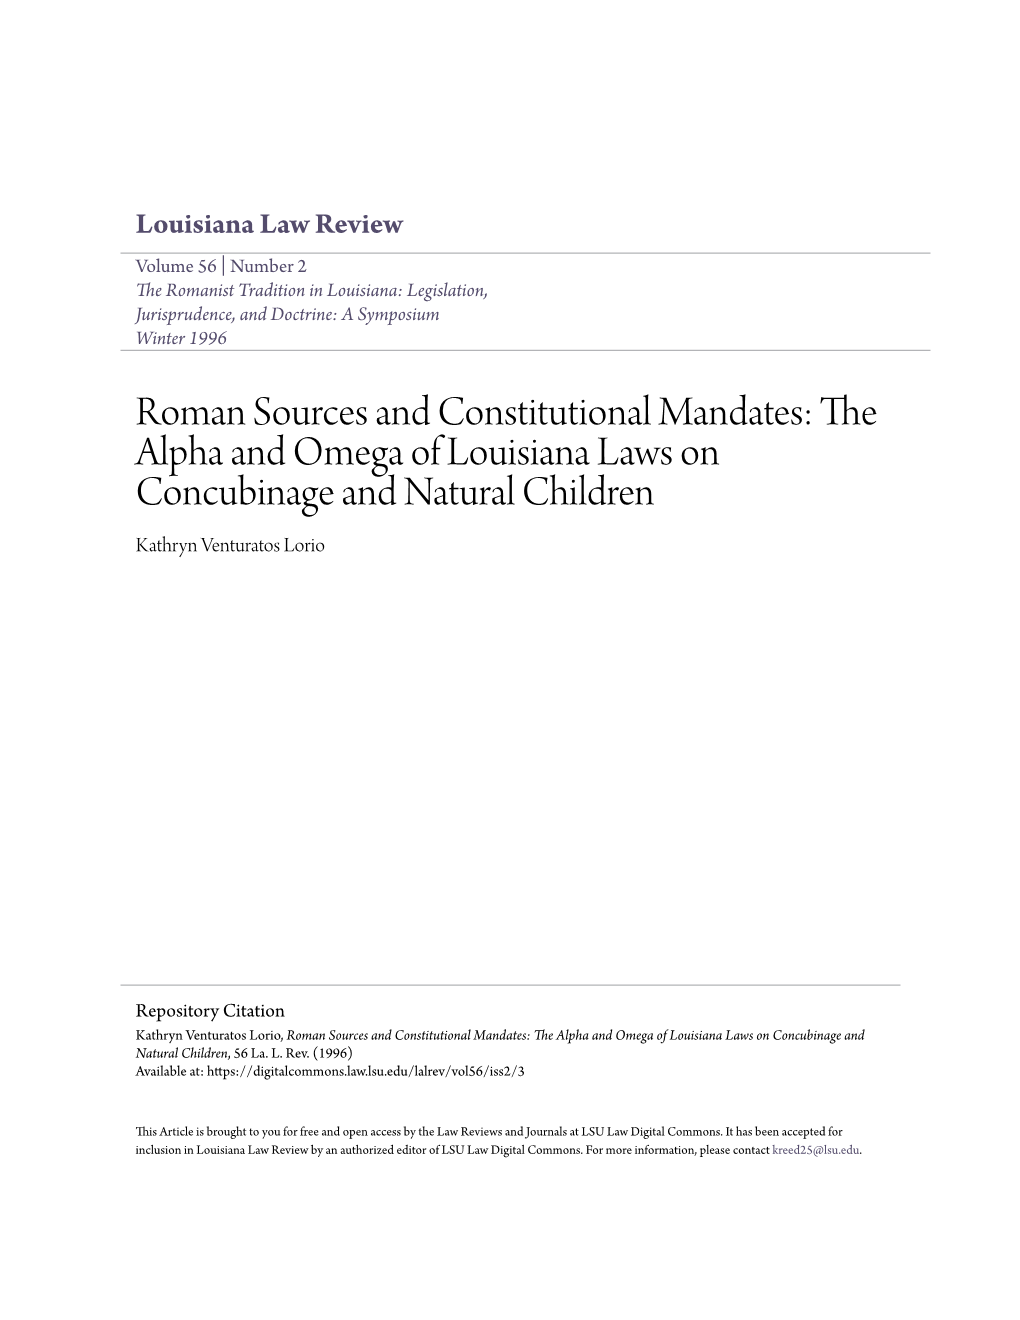 The Alpha and Omega of Louisiana Laws on Concubinage and Natural Children Kathryn Venturatos Lorio